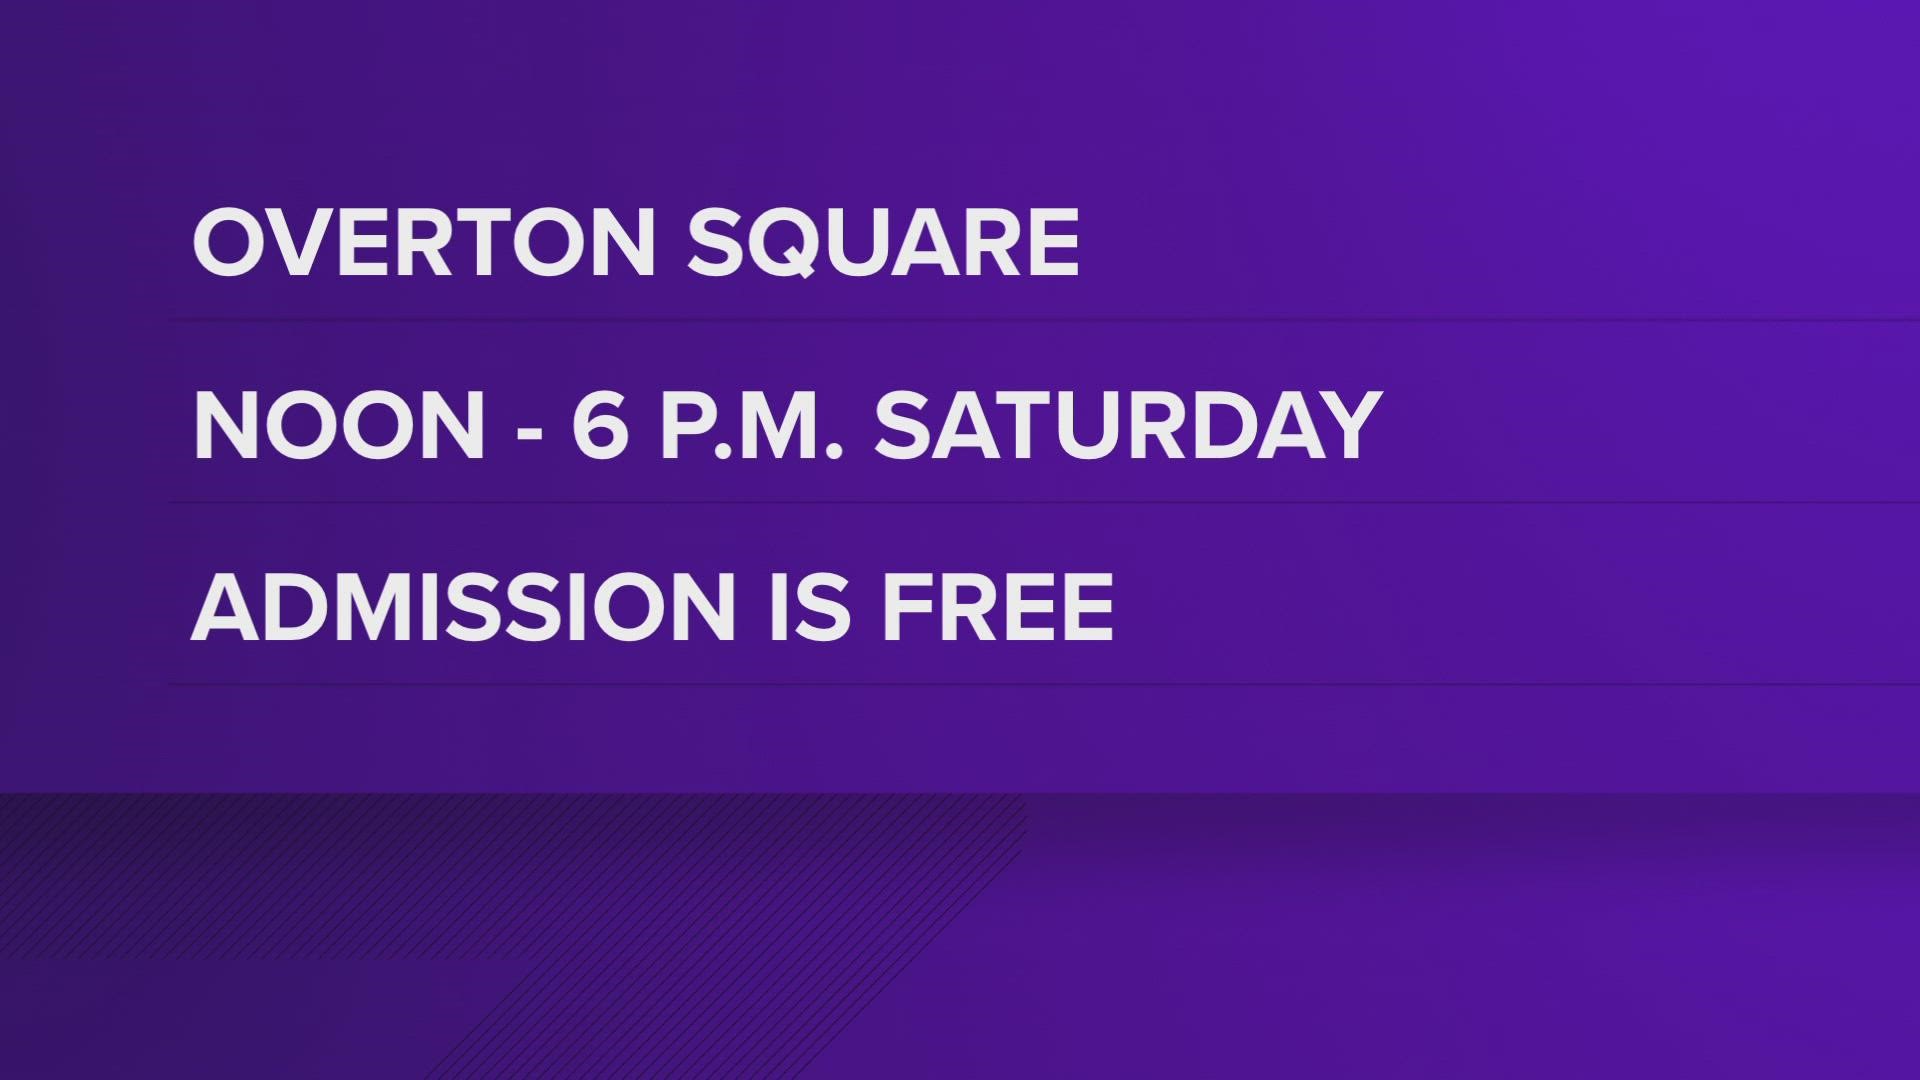 The Courtyard at Overton Square will host concessions, Latin American food, music and more with free admission.